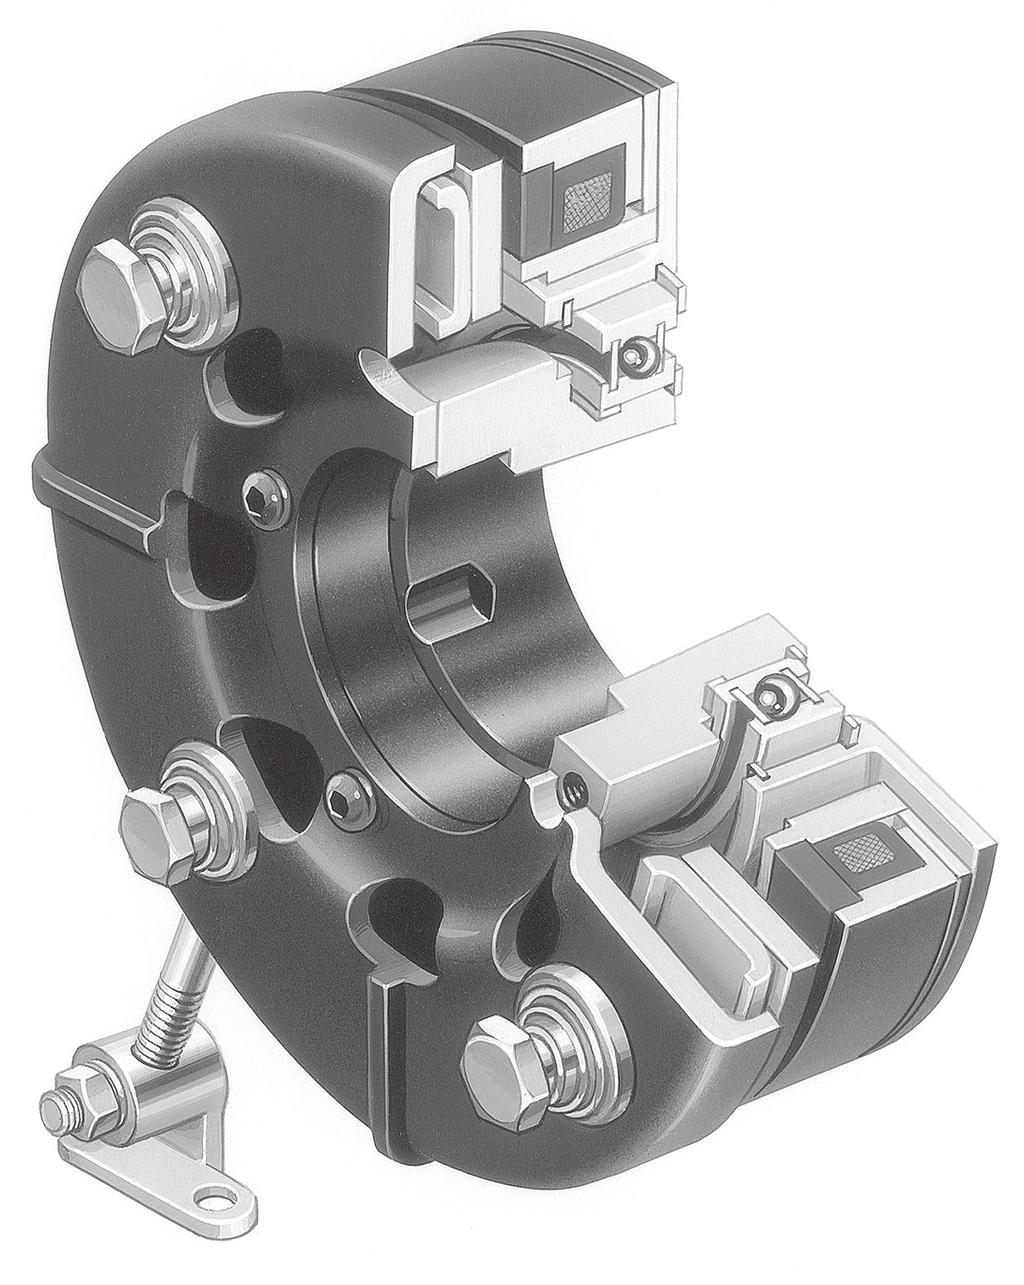 Introduction Warner Electric Electrically Released Brakes function on the same principle of response to magnetic attraction that operates other Warner Electric brakes and clutches.